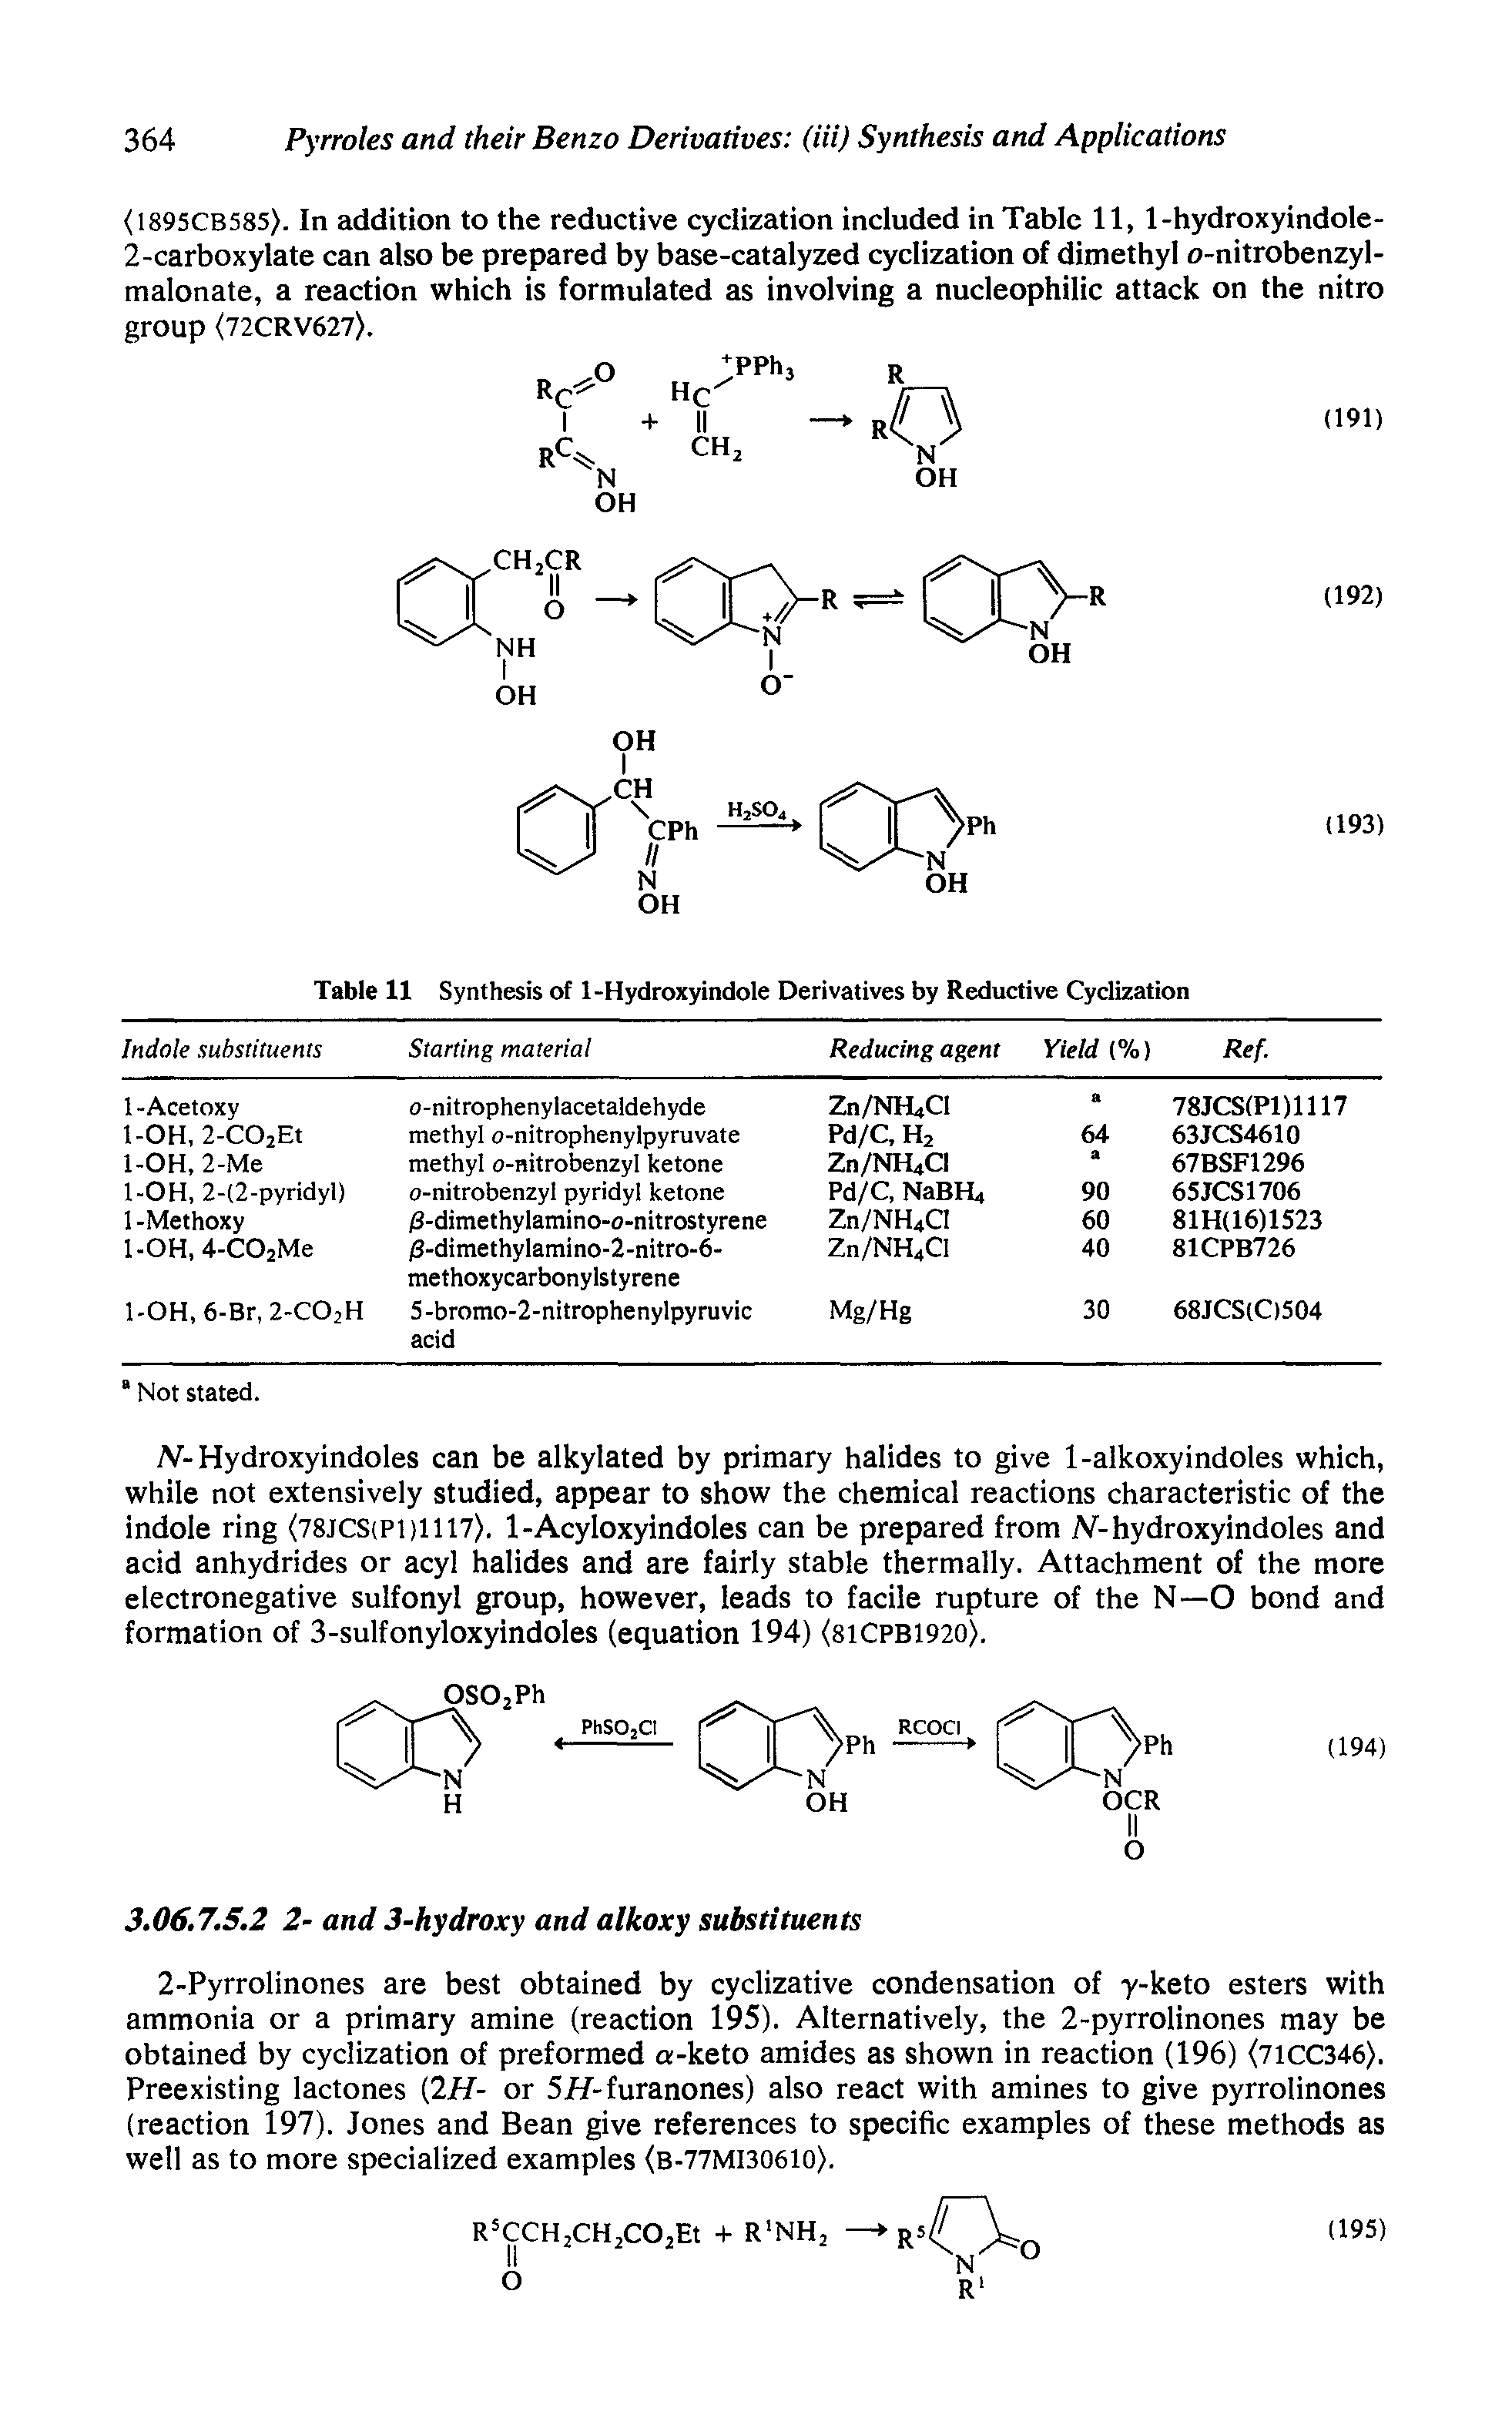 Table 11 Synthesis of 1-Hydroxyindole Derivatives by Reductive Cyclization...